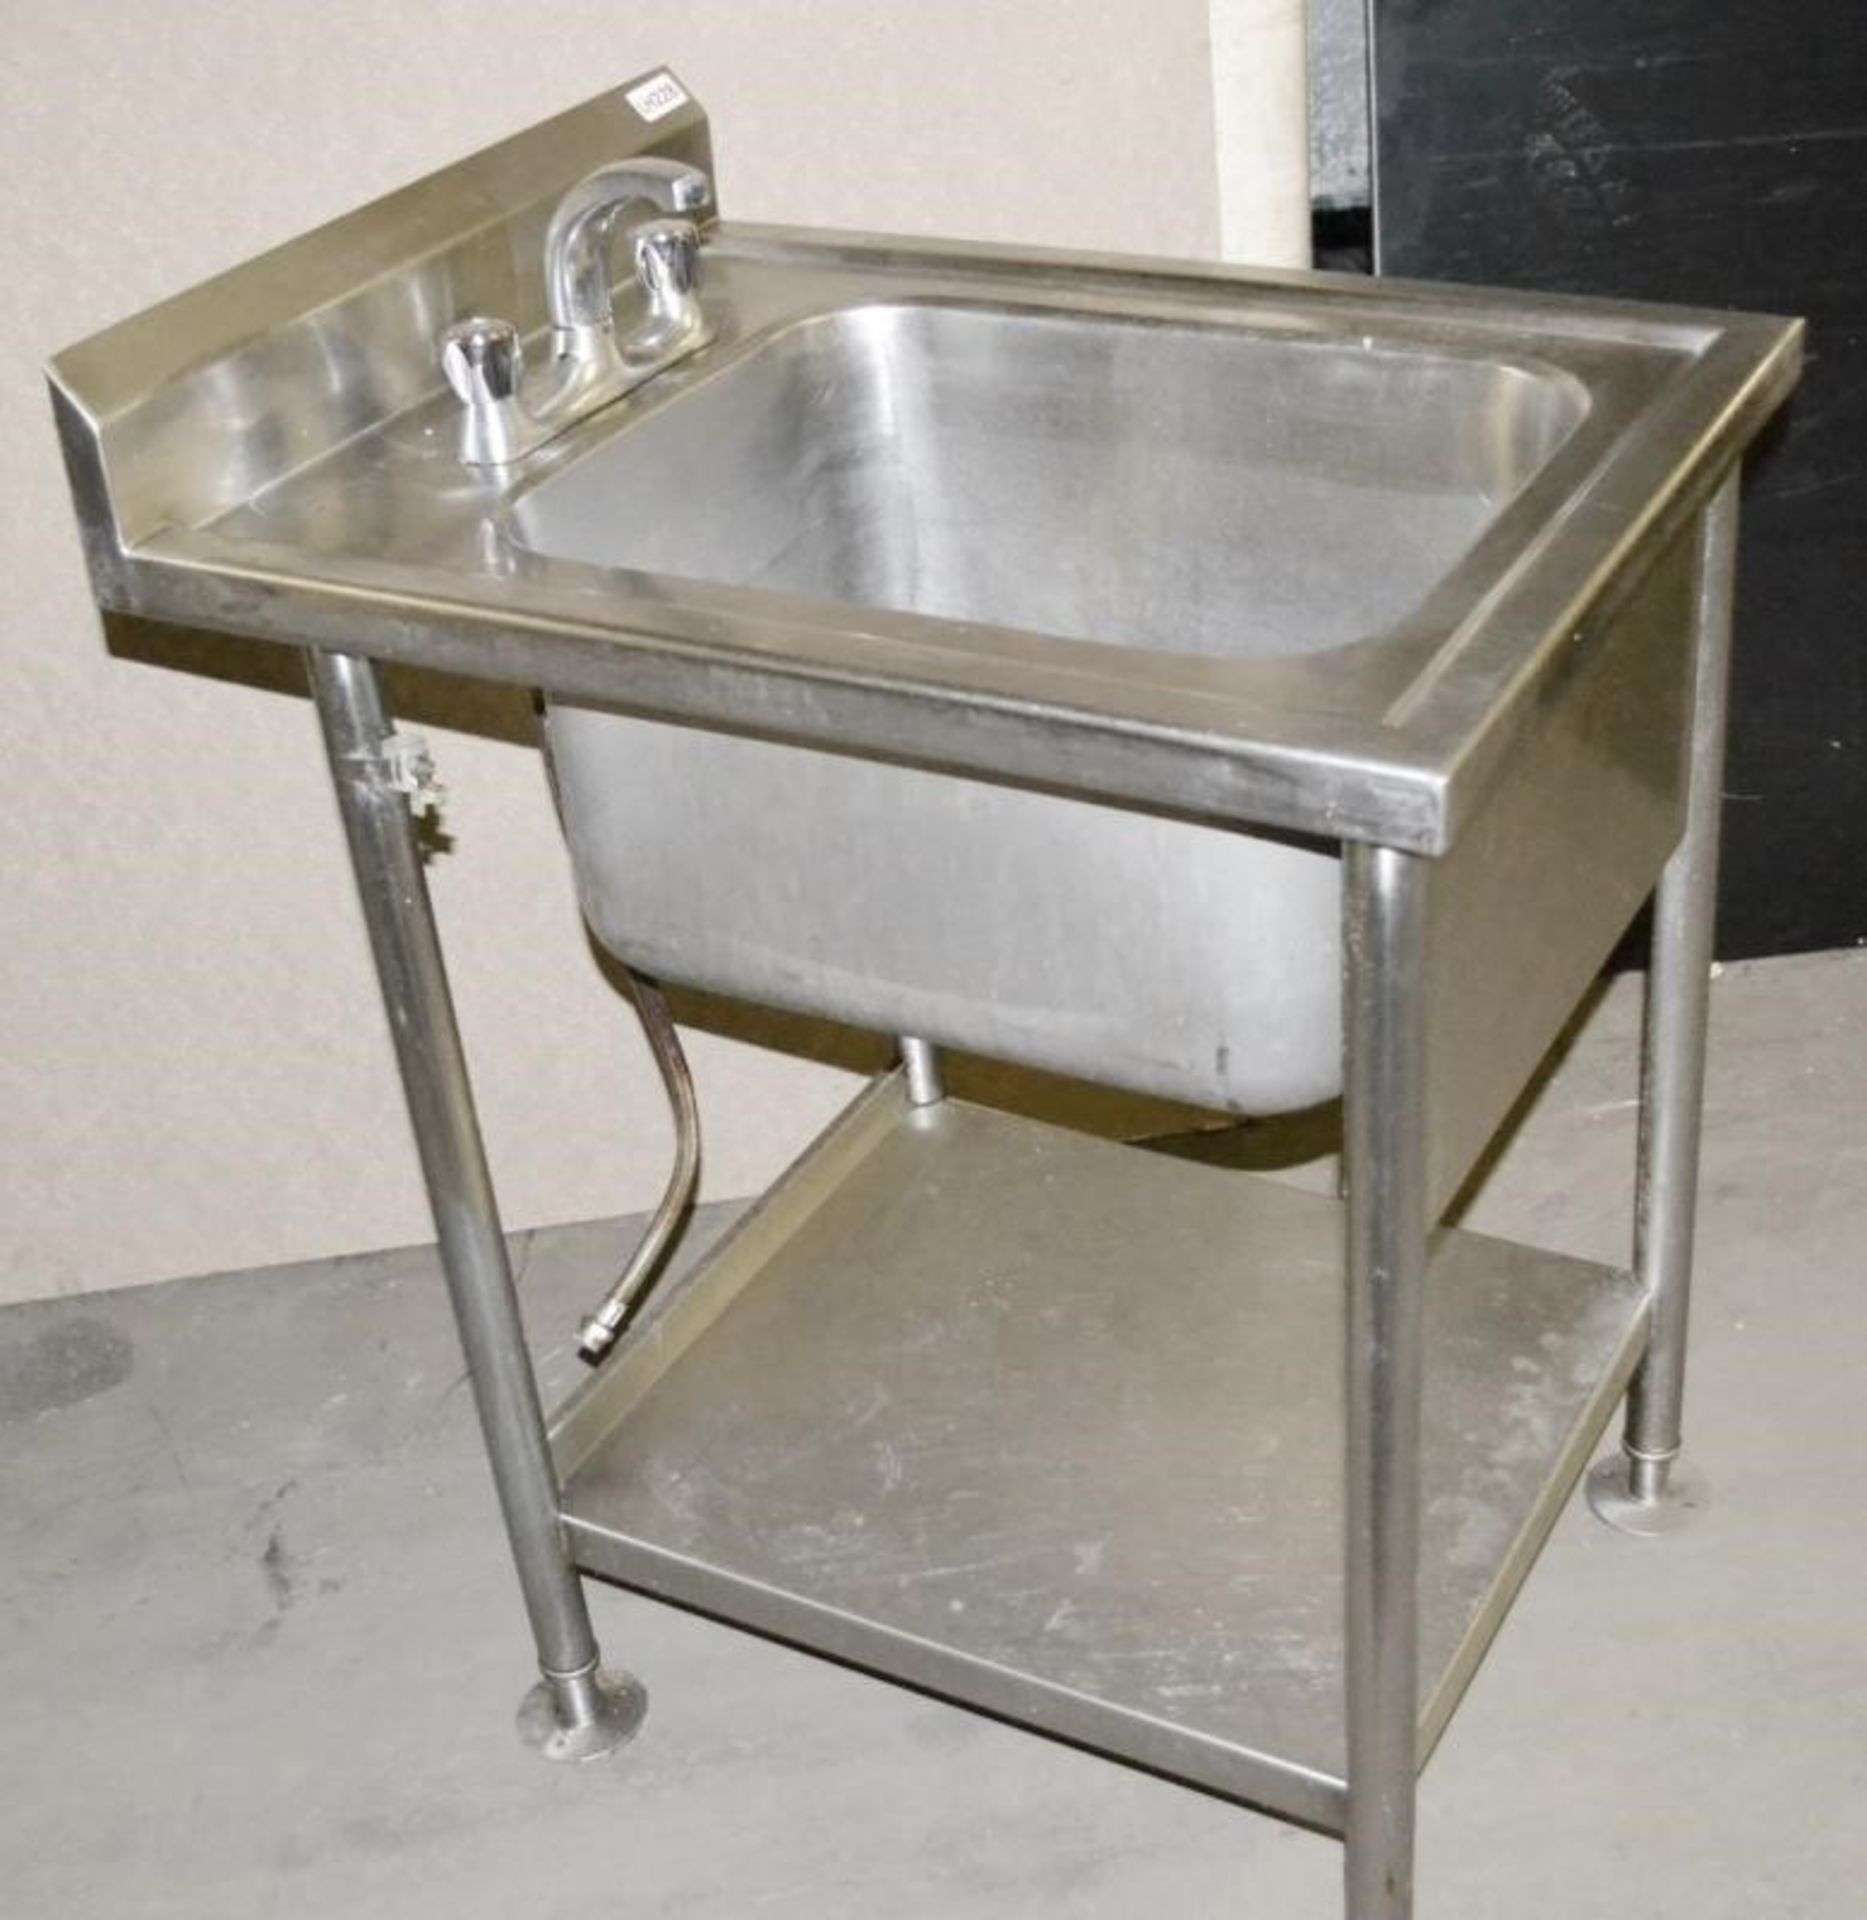 1 x Stainless Steel Commercial Sink Unit / Wash Station With Mixer Tap, Spillage Lip, Splashback and - Image 3 of 7